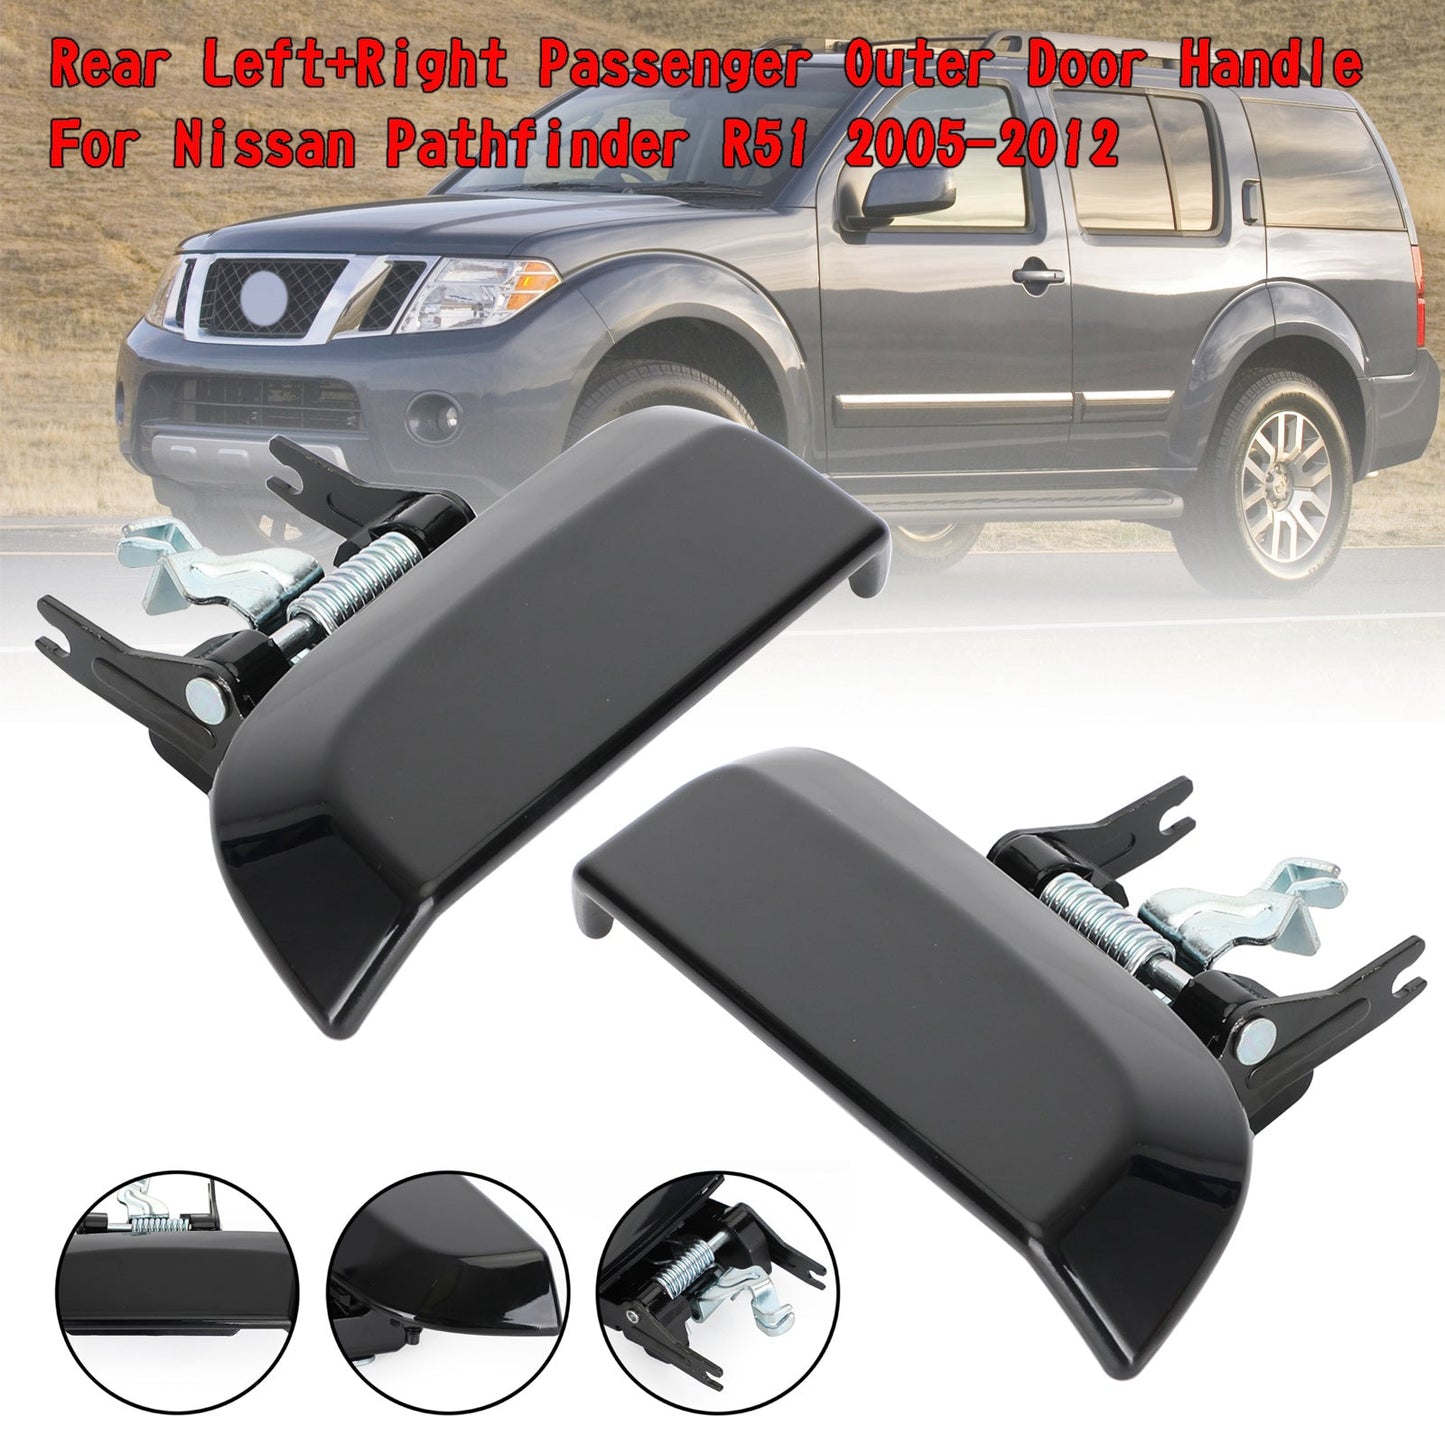 Rear Left+Right Passenger Outer Door Handle For Nissan Pathfinder R51 2005-2012